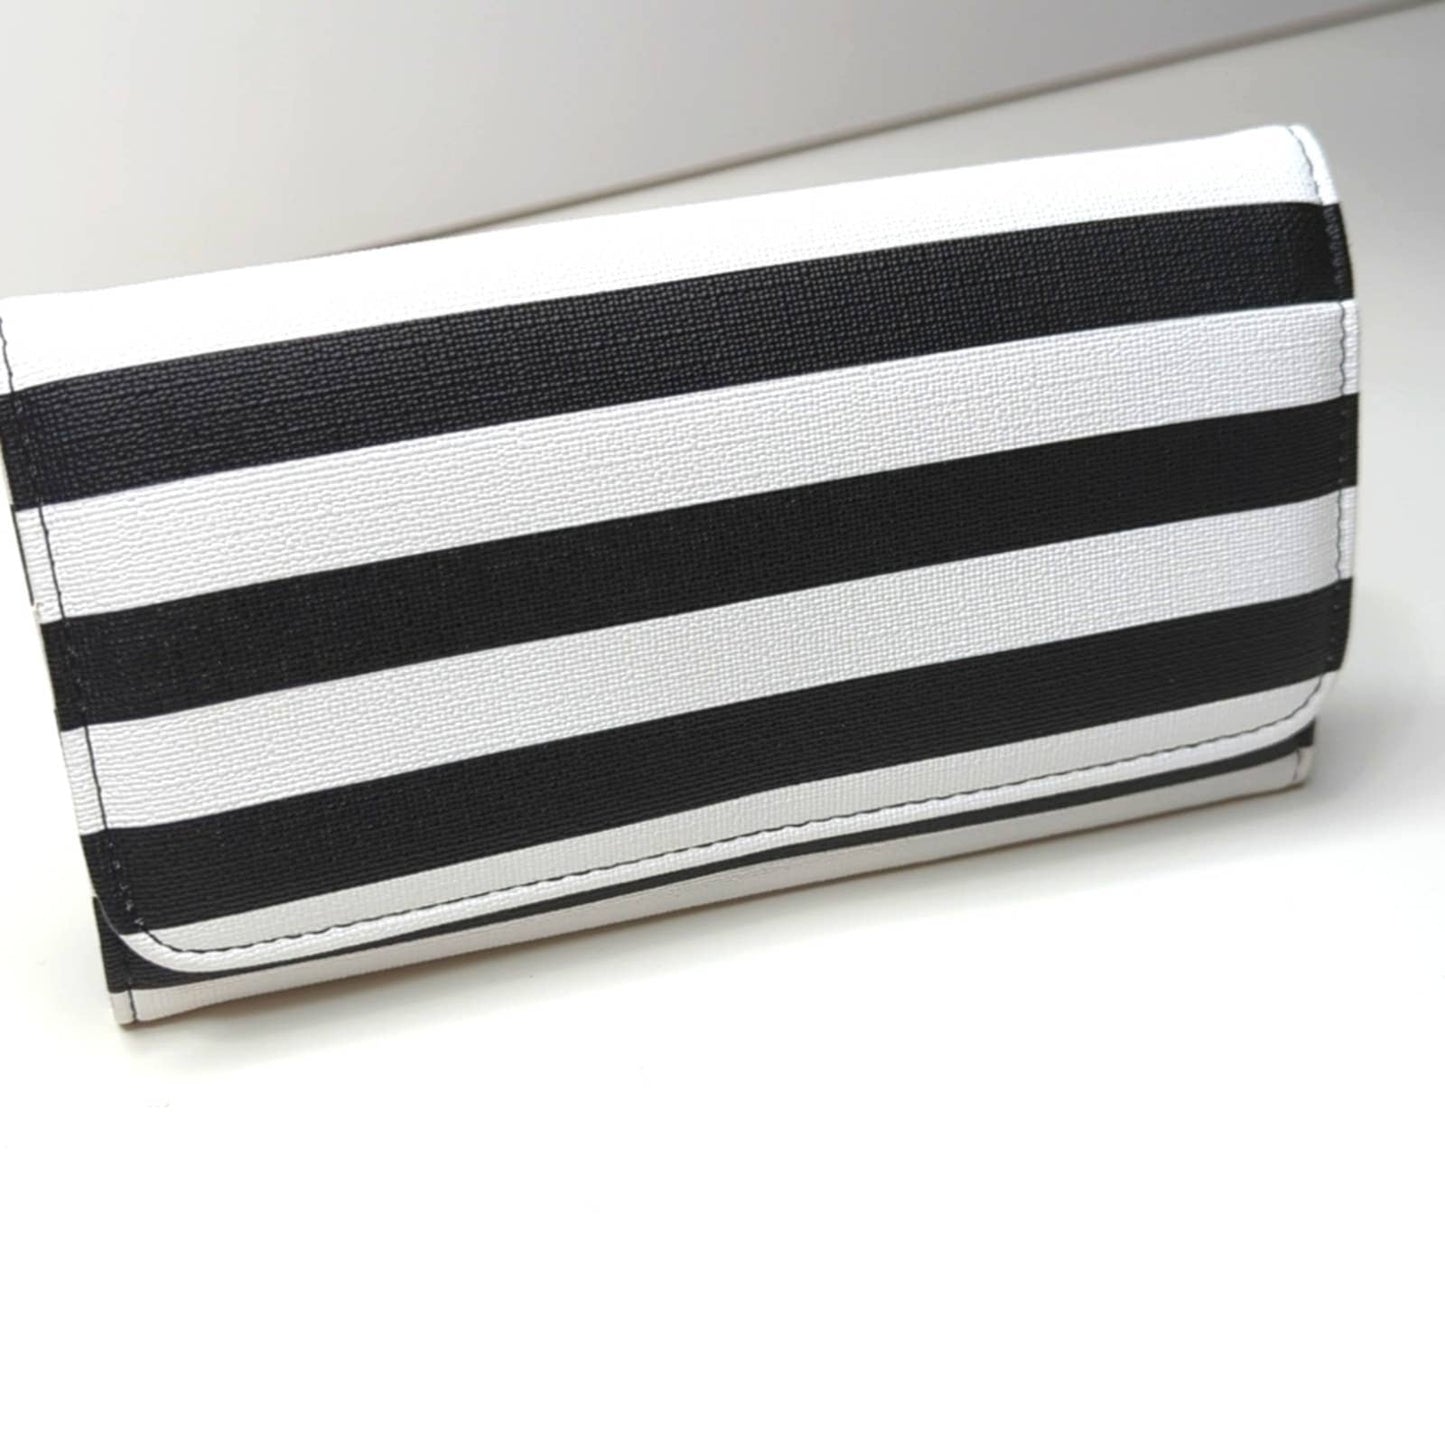 KUT FROM THE KLOTH Black White Striped Slimfold Wallet Vegan Leather NEW